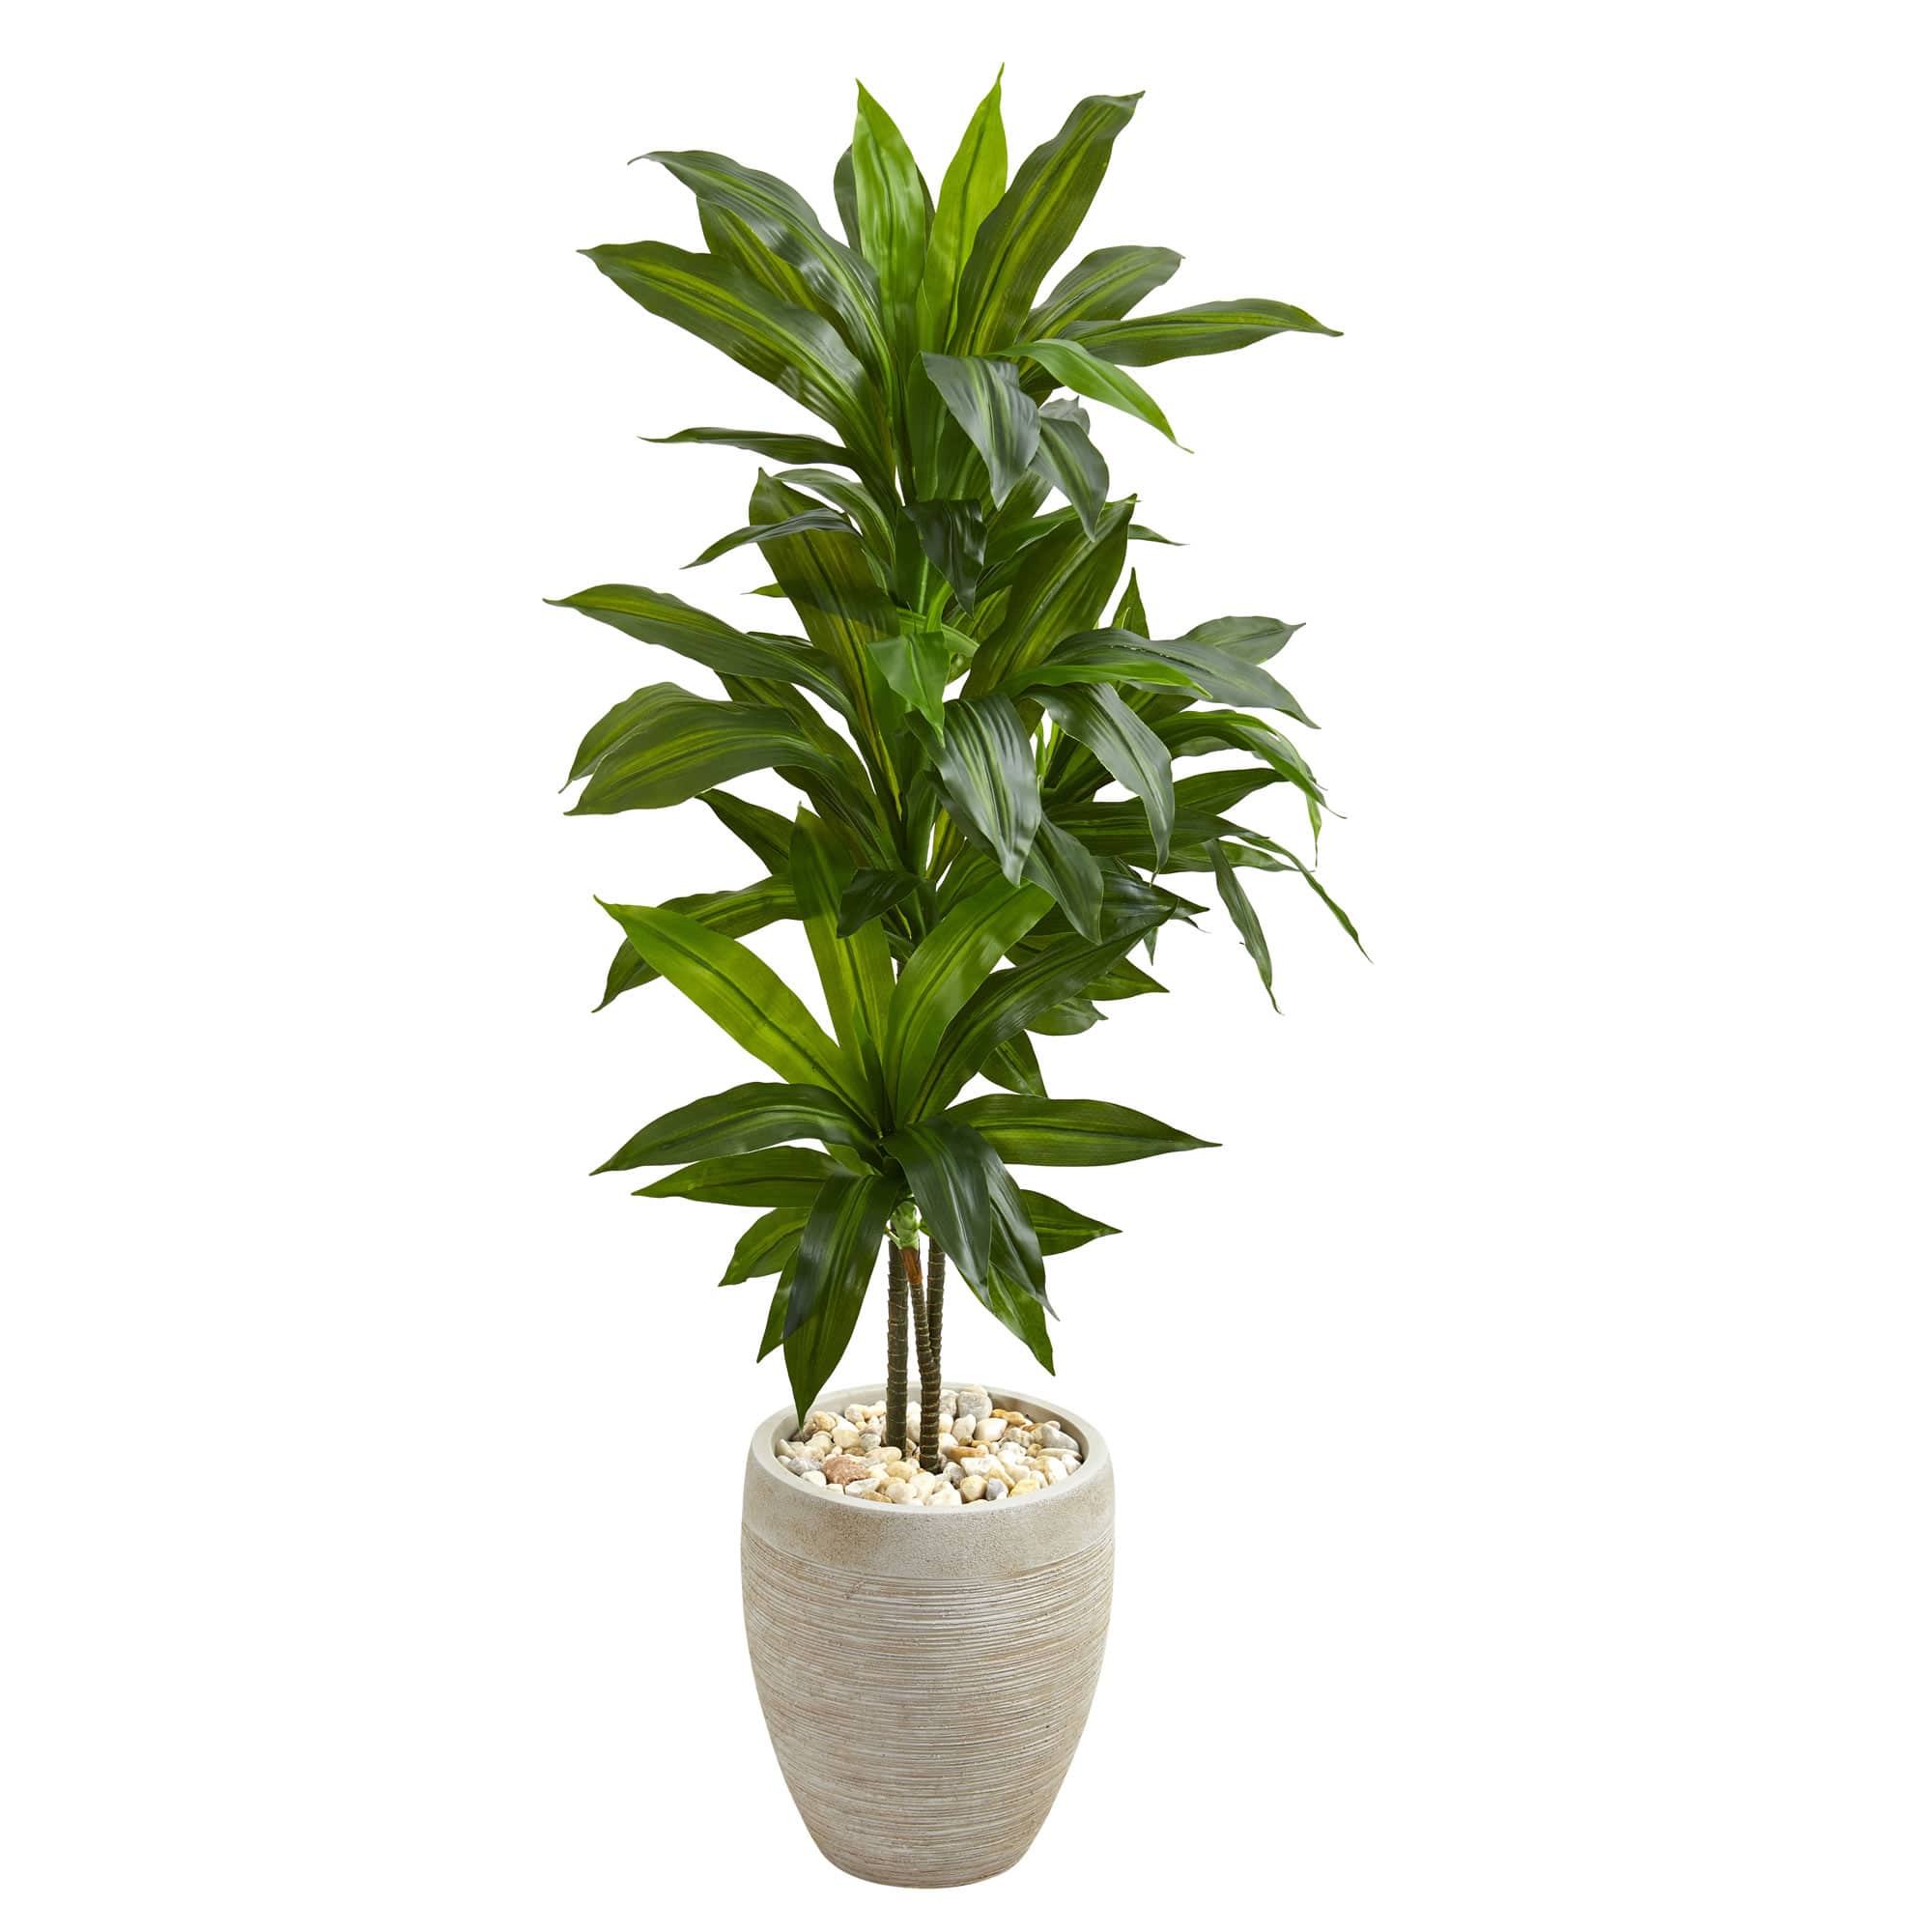 4ft. Dracaena Plant in Sand Colored Planter